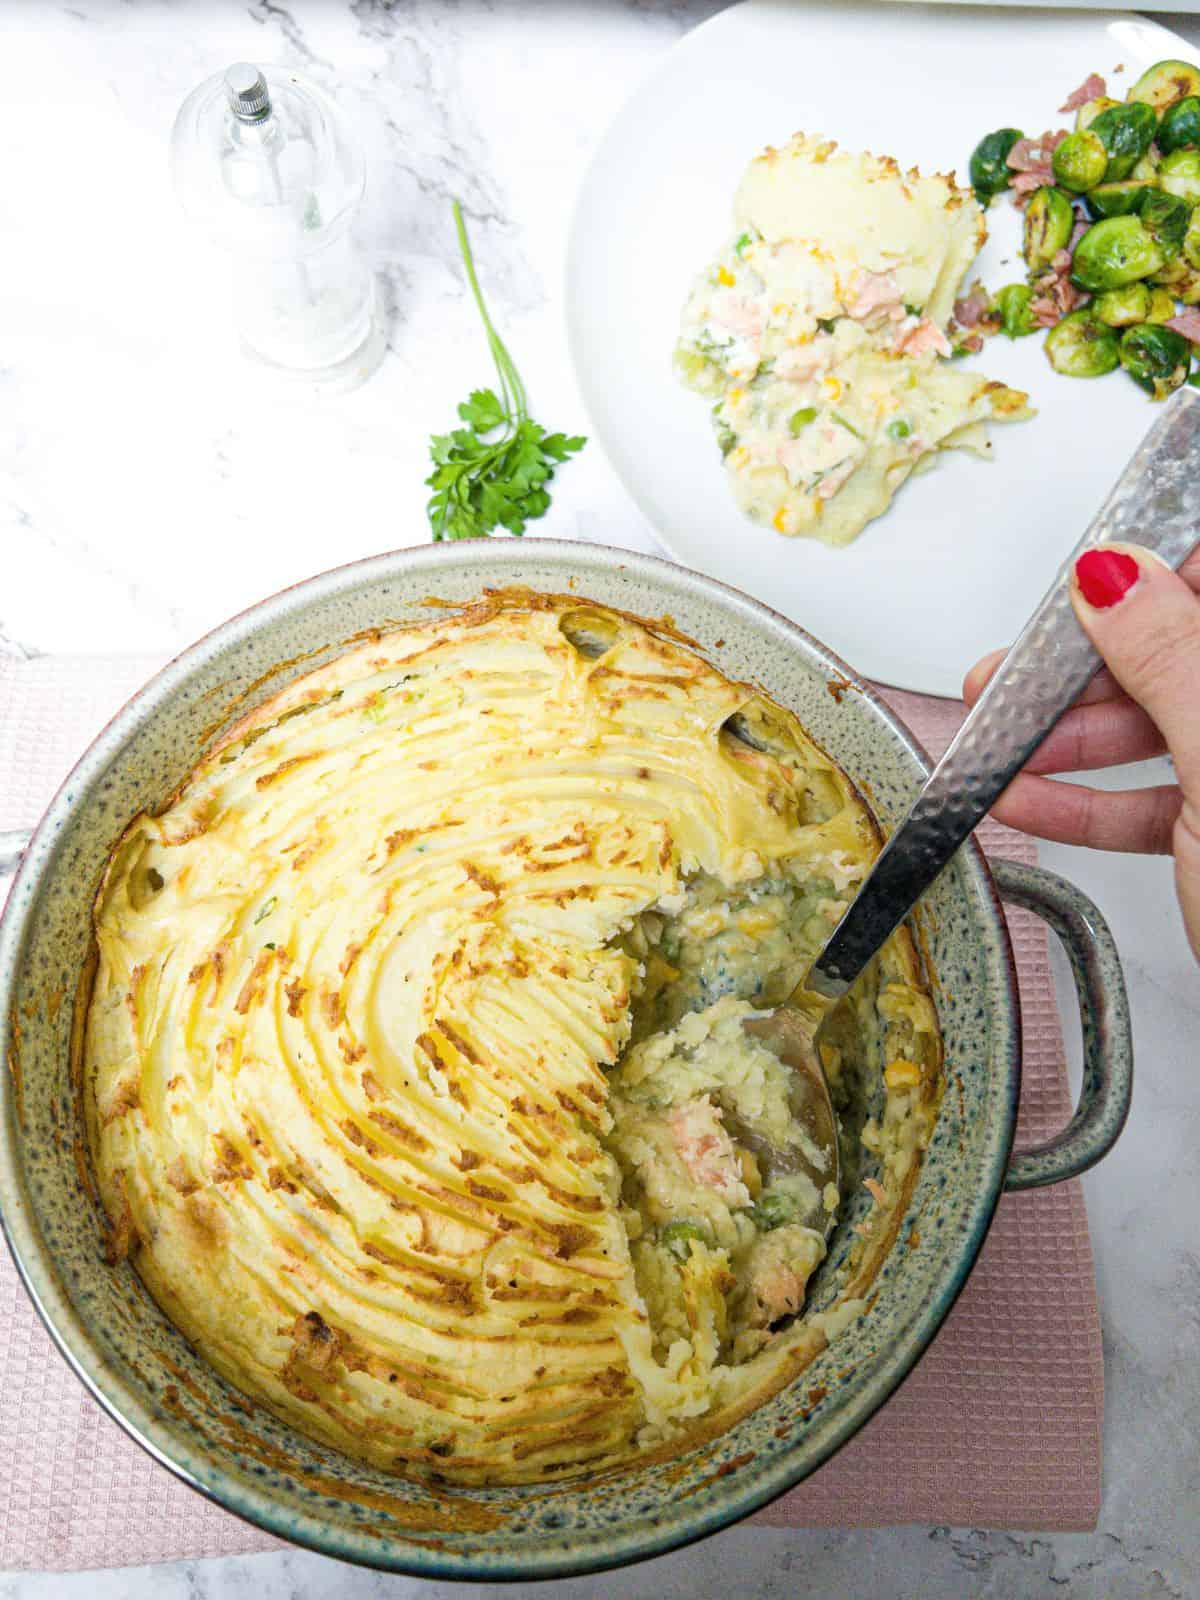 Dairy free fish pie in a casserole dish with a hand spooning out a portion.